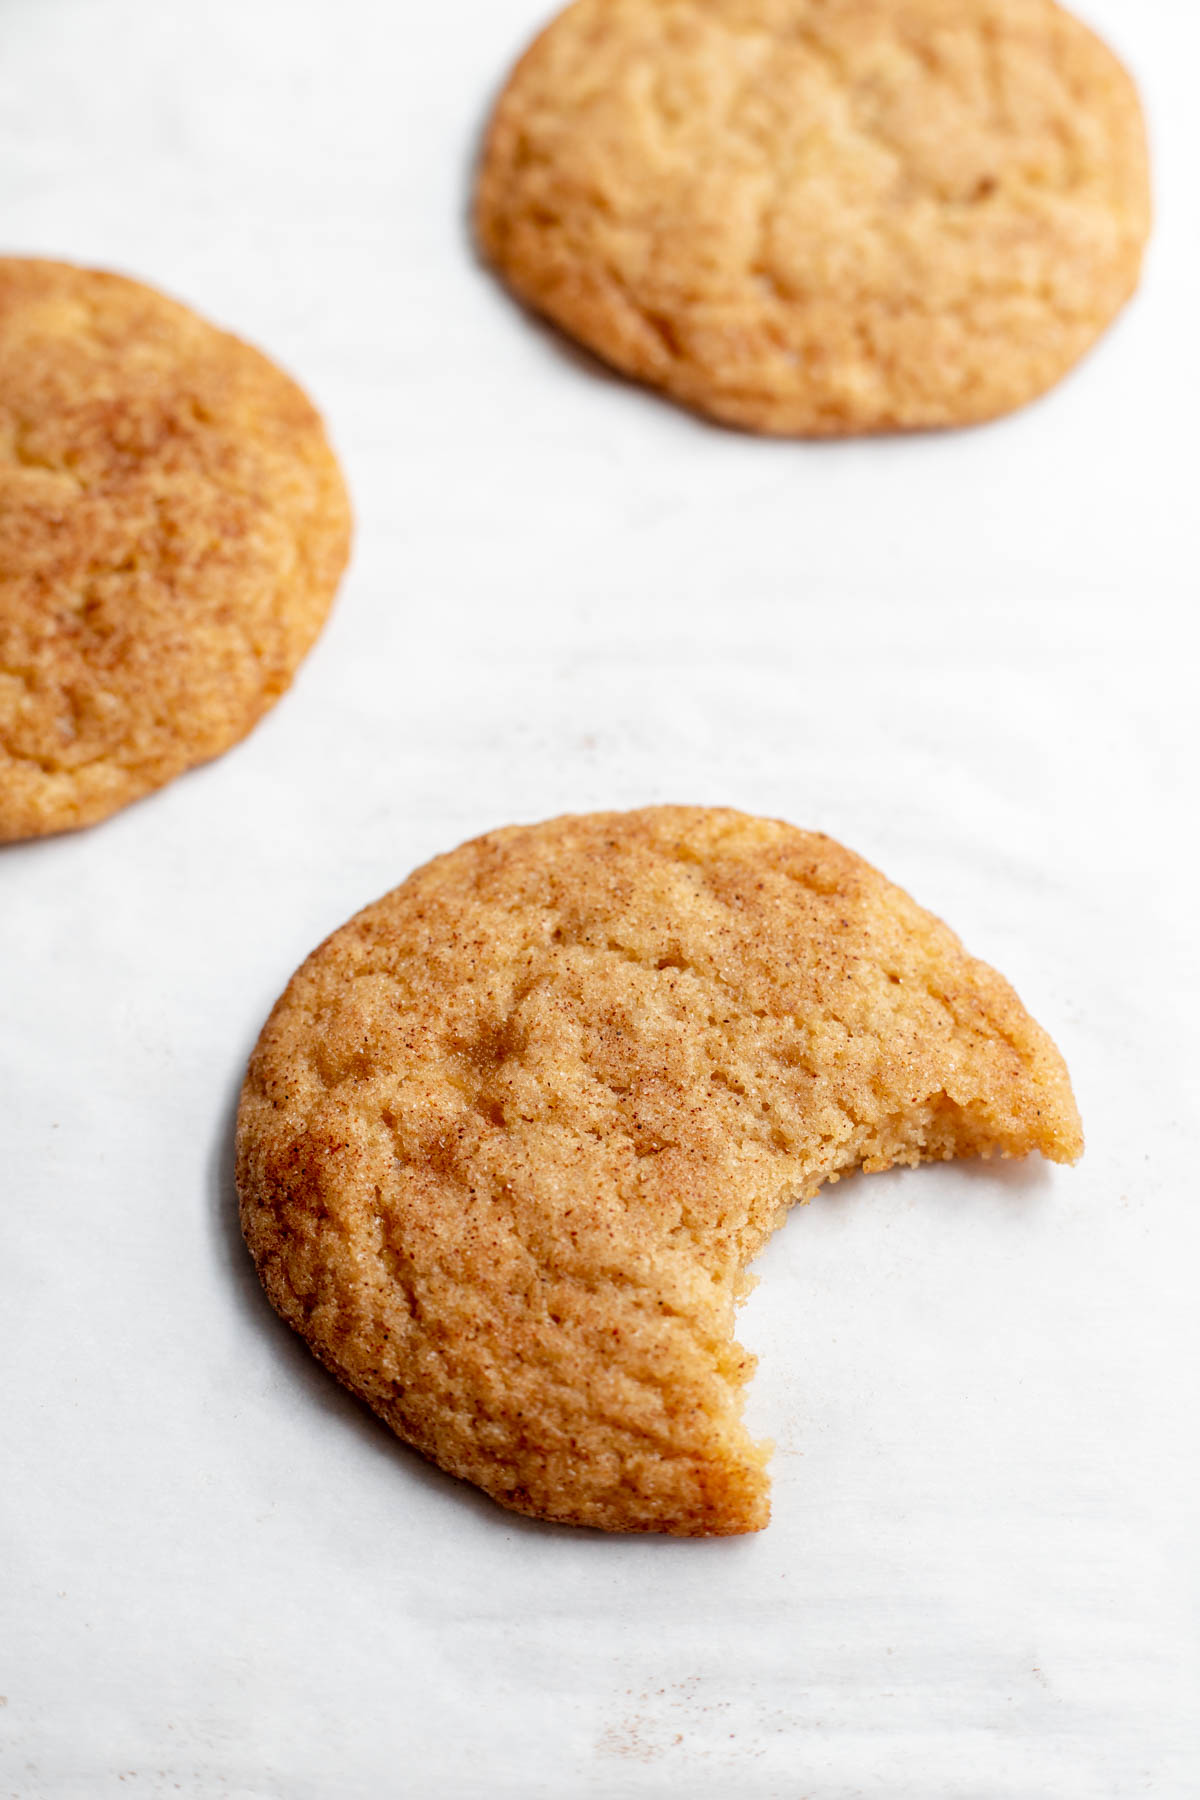 Three snickerdoodle cookies with a bite taken out of one of them 